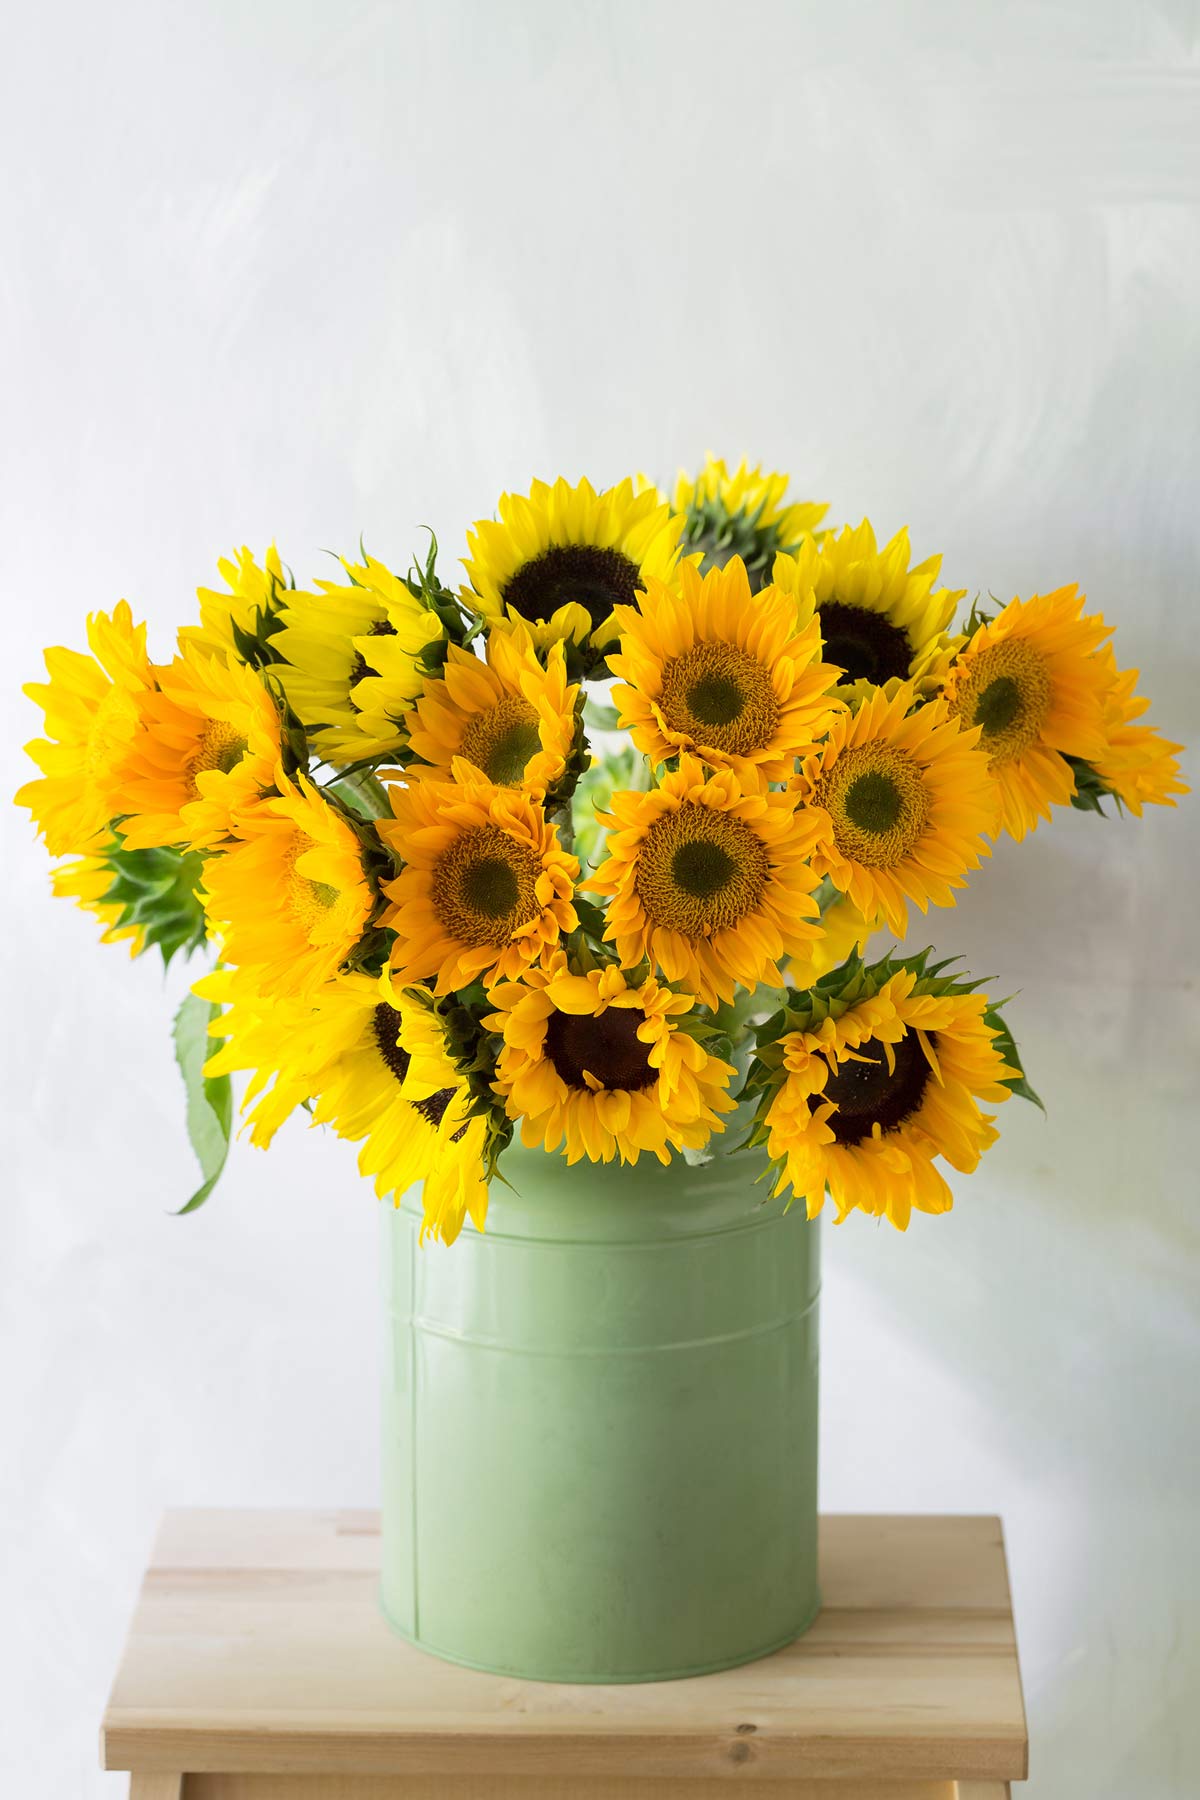 A container filled with yellow sunflowers.